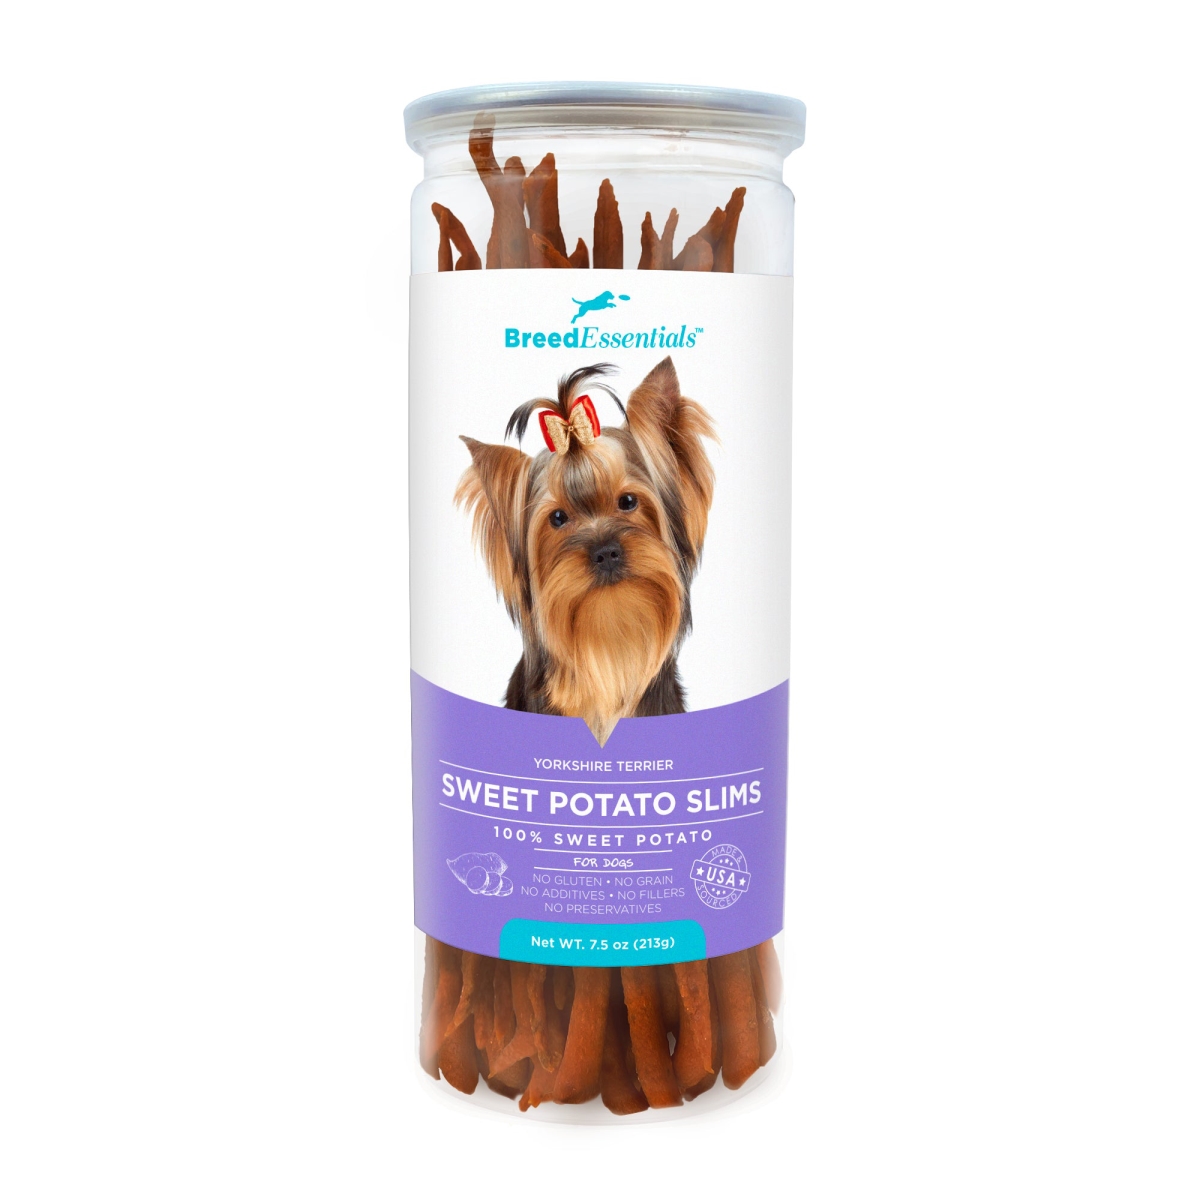 Picture of Breed Essentials 197247000204 7.5 oz Sweet Potato Slims - Yorkshire Terrier